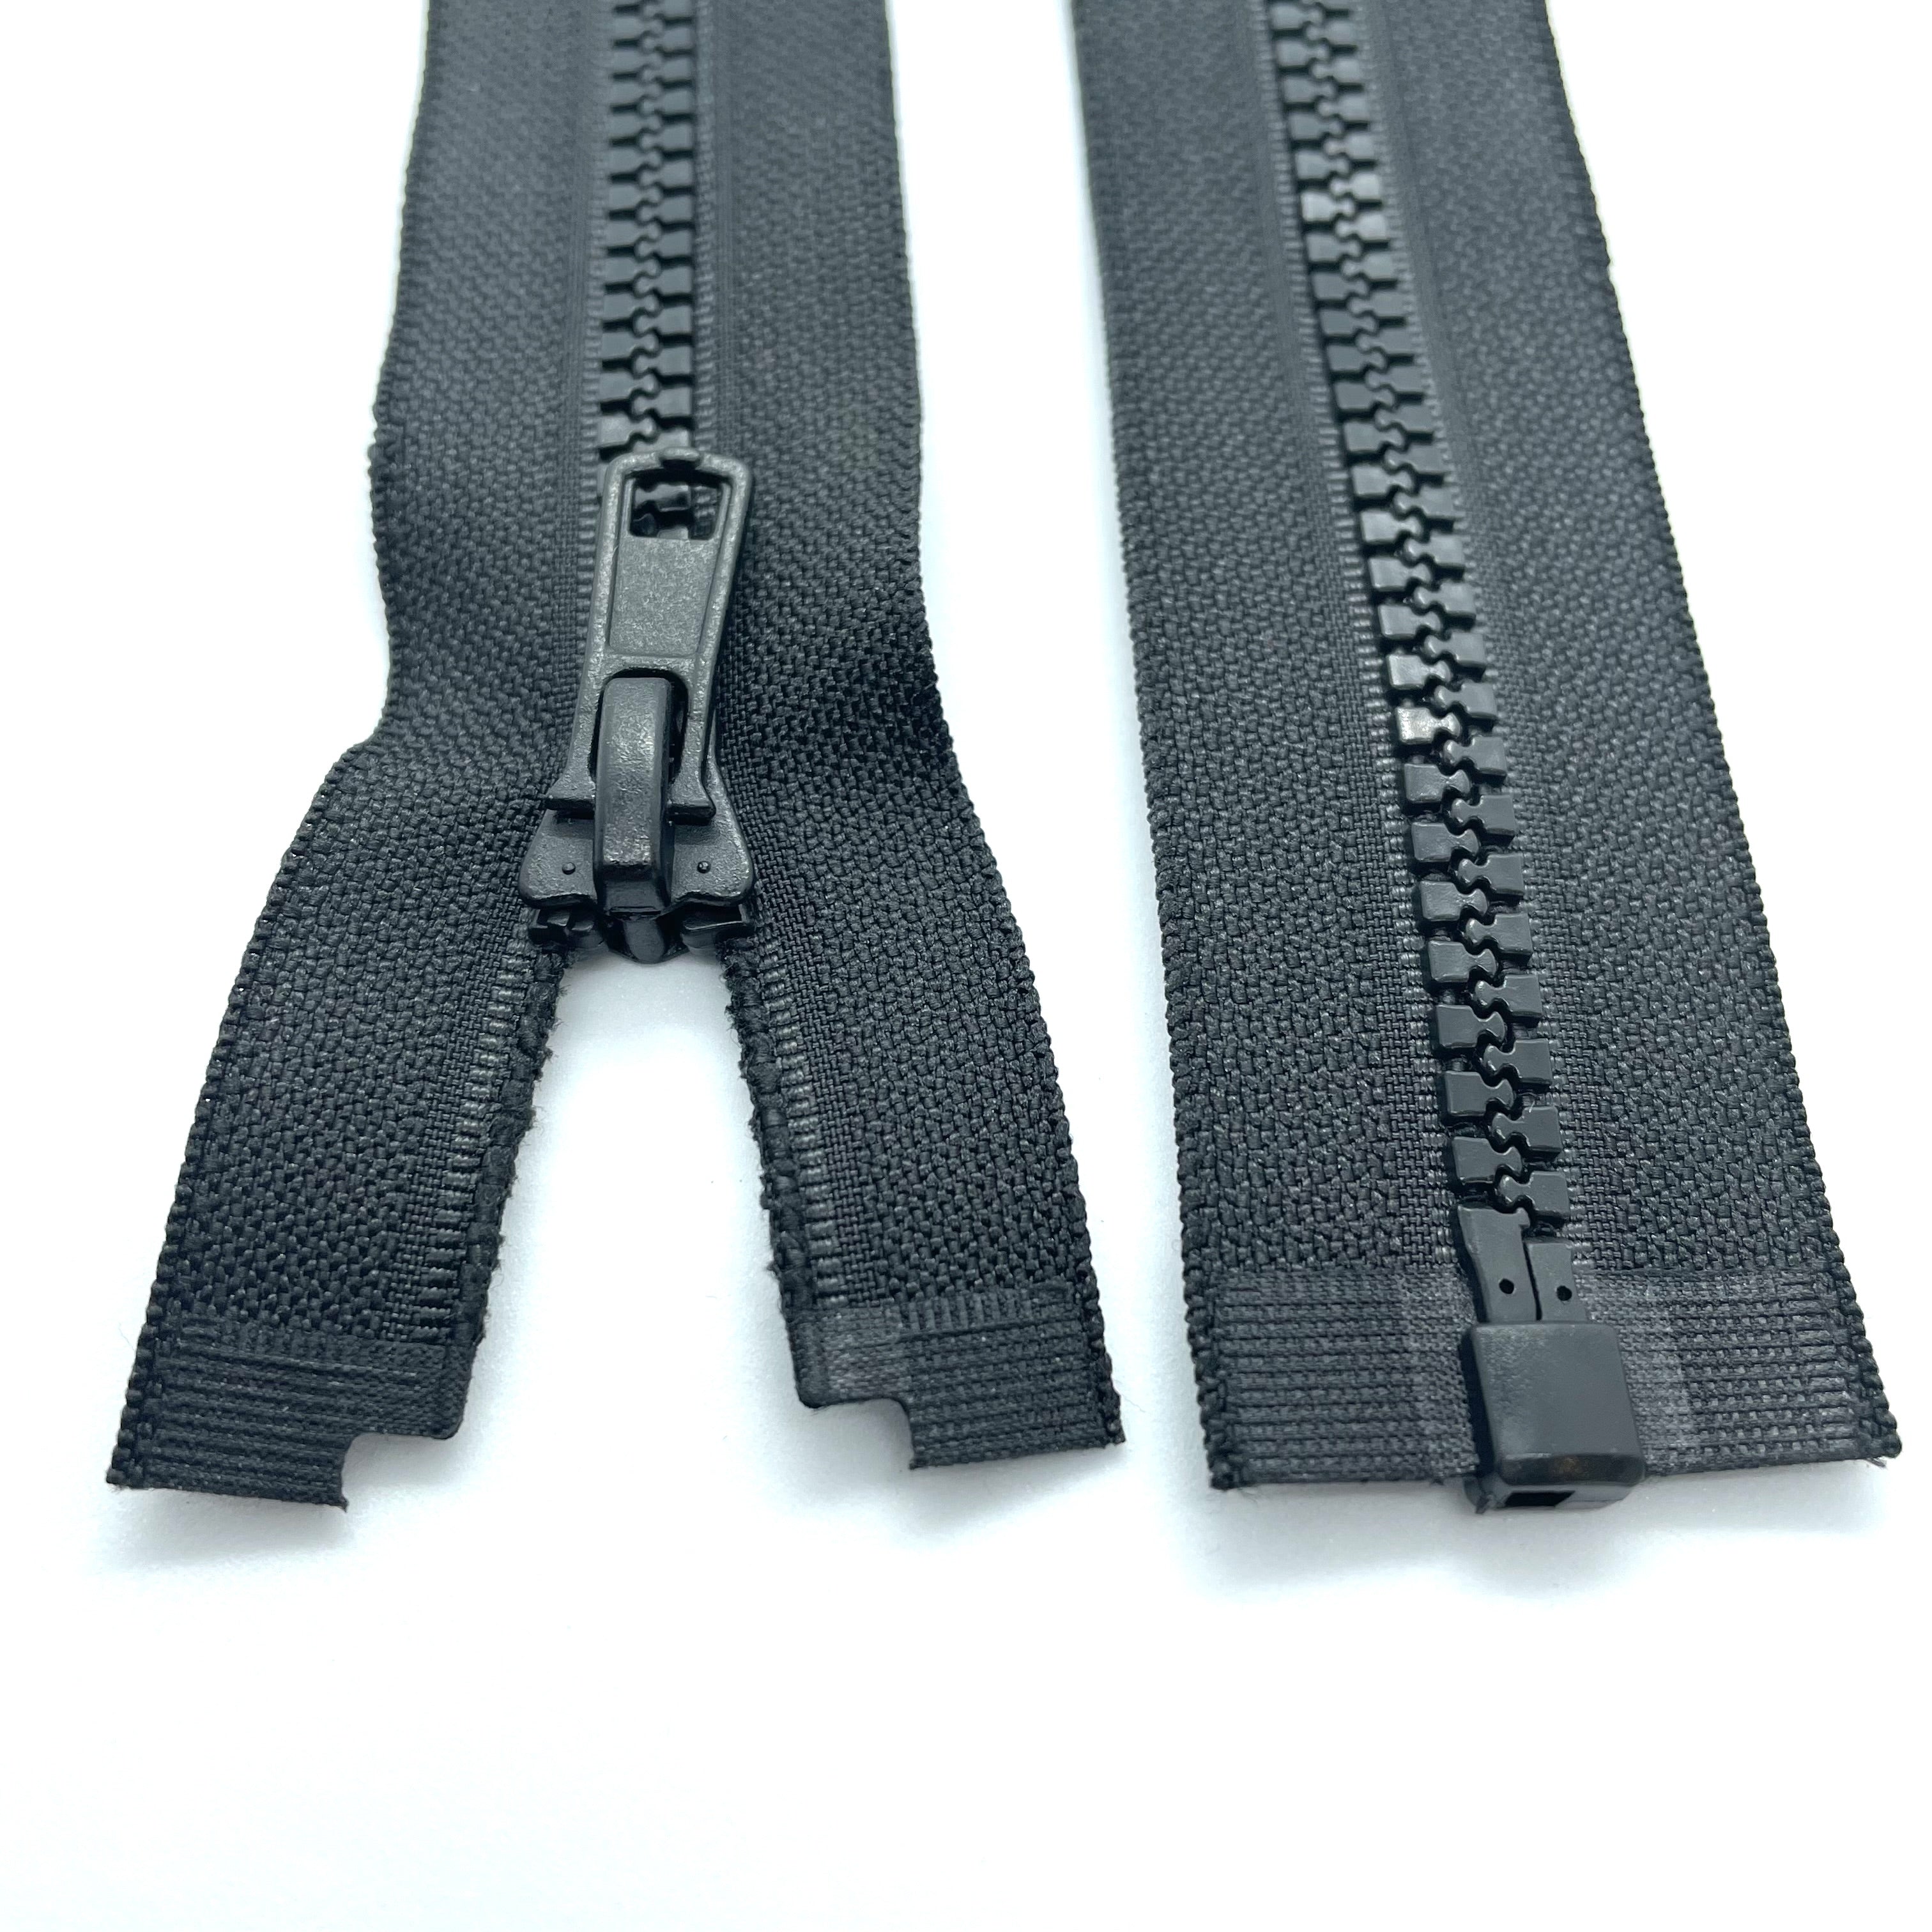 black Chunky open-ended zippers in Size 5: Robust and reliable zippers designed for heavy-duty applications. The chunky design ensures durability and strength, suitable for projects requiring sturdy closures. With open-ended functionality, they offer accessibility and ease of use for jackets, bags, and outdoor gear. Size 5 provides ample width for secure fastening, making these zippers ideal for projects that demand both style and substance.